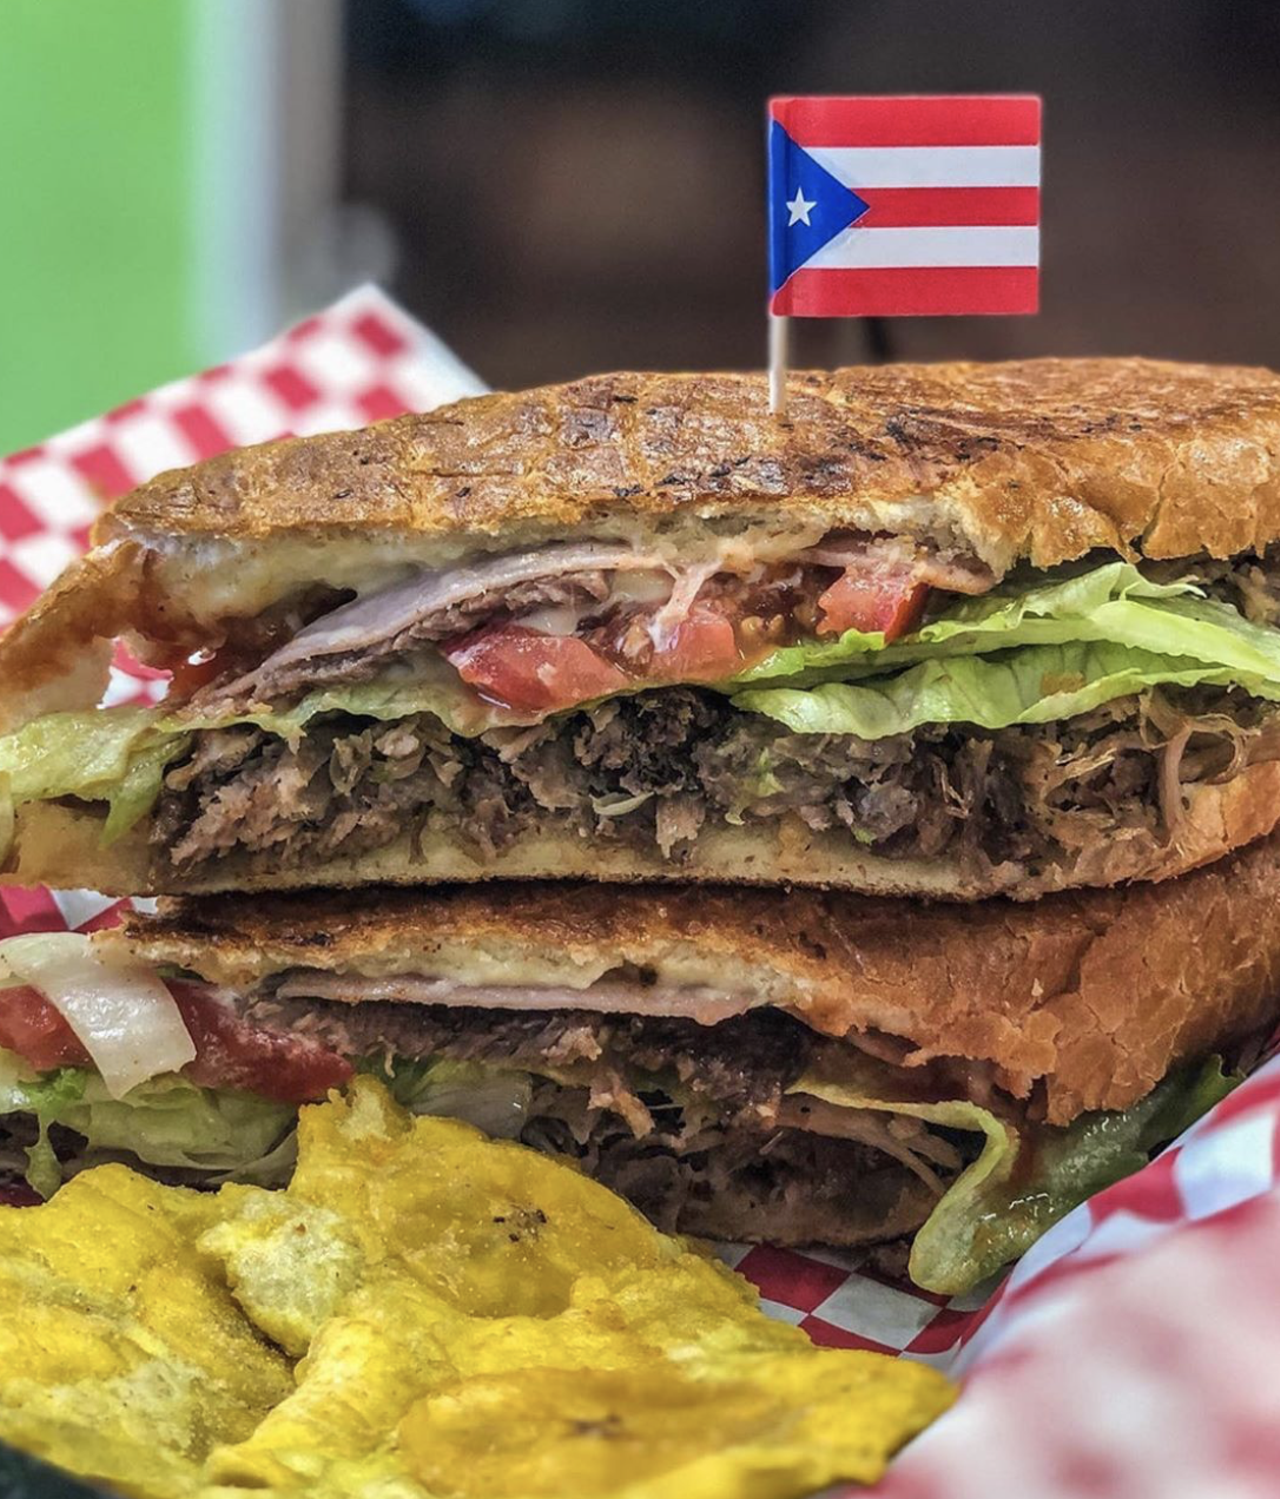 El Coquí Restaurant
5036 W Military Dr, (210) 645-6465, elcoquisatx.com
If Puerto Rican food is your jam, hit up El Coquí for authentic dishes inspired by the island. From mofongo to ropa vieja, you’ll have plenty of tasty options – just be sure to order the platanos and Materva for a true Puerto Rican meal. While the island spot isn’t currently offering dine-in, get your fix with takeout and delivery options. 
Photo via Instagram / 
Elcoquisatx